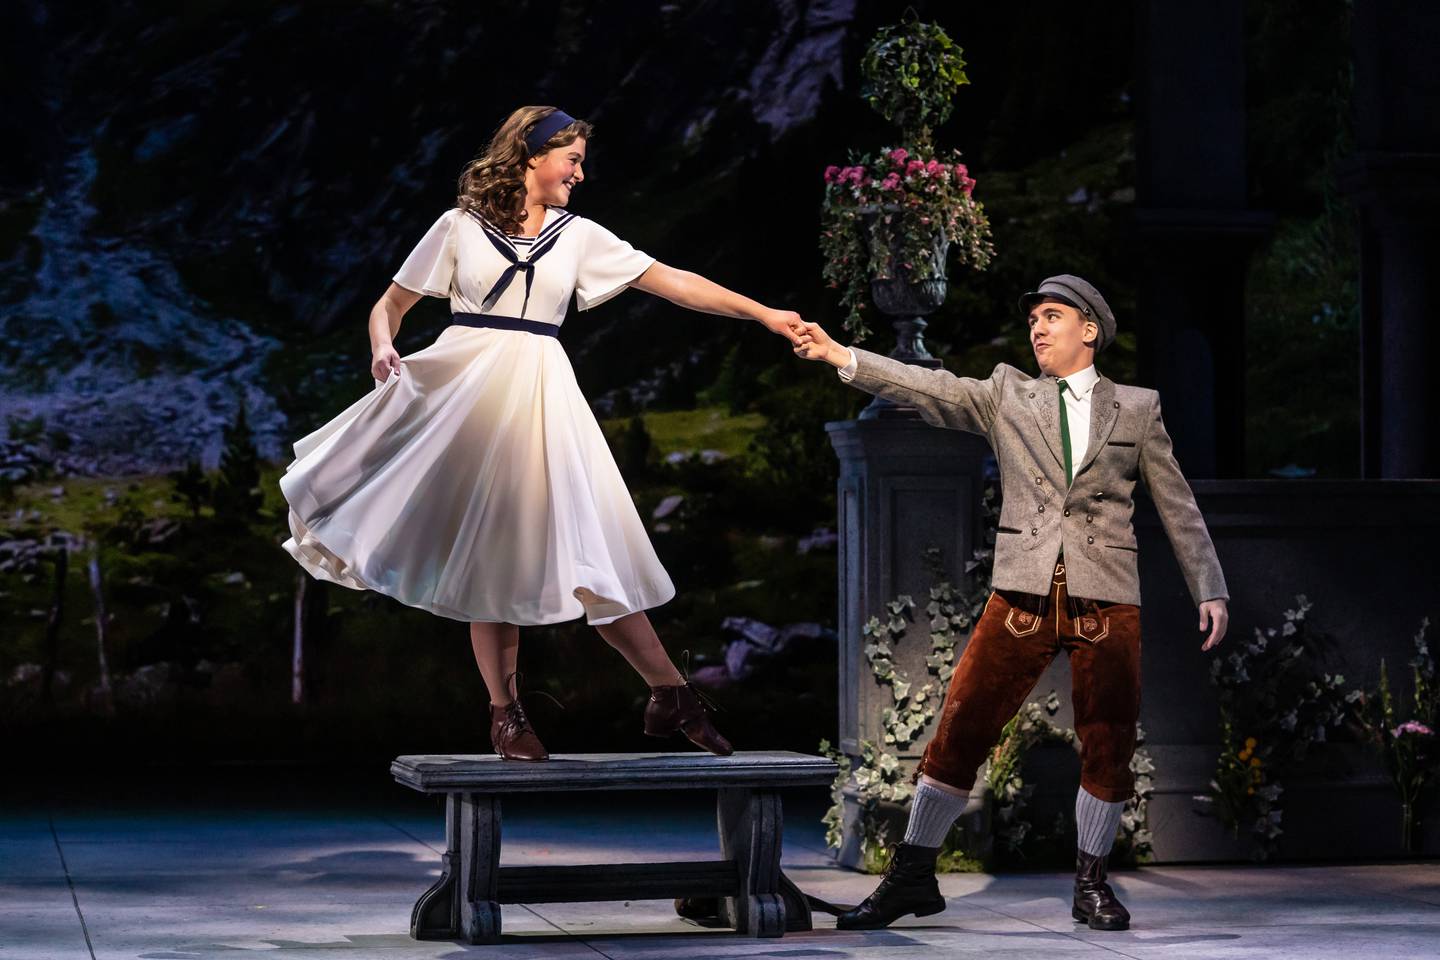 Liesl (Julia Aragon (left) is 16, going on 17, and it’s Rolf (Michael Harp) who has captured her interest in Paramount Theatre’s holiday season production, The Sound of Music. Rodgers and Hammerstein’s beloved musical runs November 9, 2022-January 14, 2023 at Paramount Theatre, 23 E. Galena Blvd. in downtown Aurora. Tickets: paramountaurora.com or (630) 896-6666. Credit: Liz Lauren